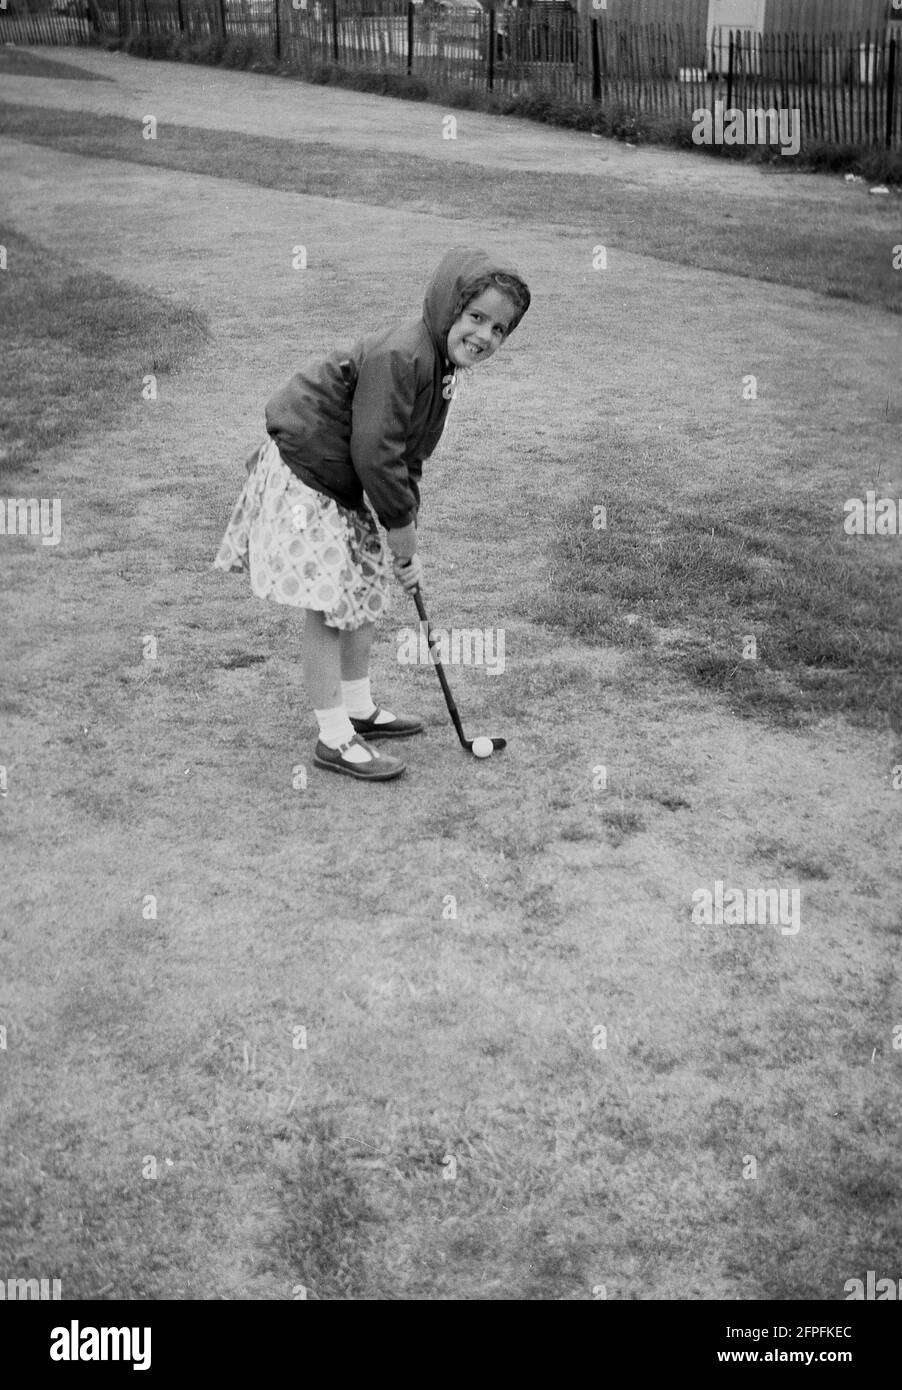 1962, historical, a little girl wearing a dress and anorak, playing golf on a seaside putting course, Littlehampton, West Sussex, England, UK. Stock Photo